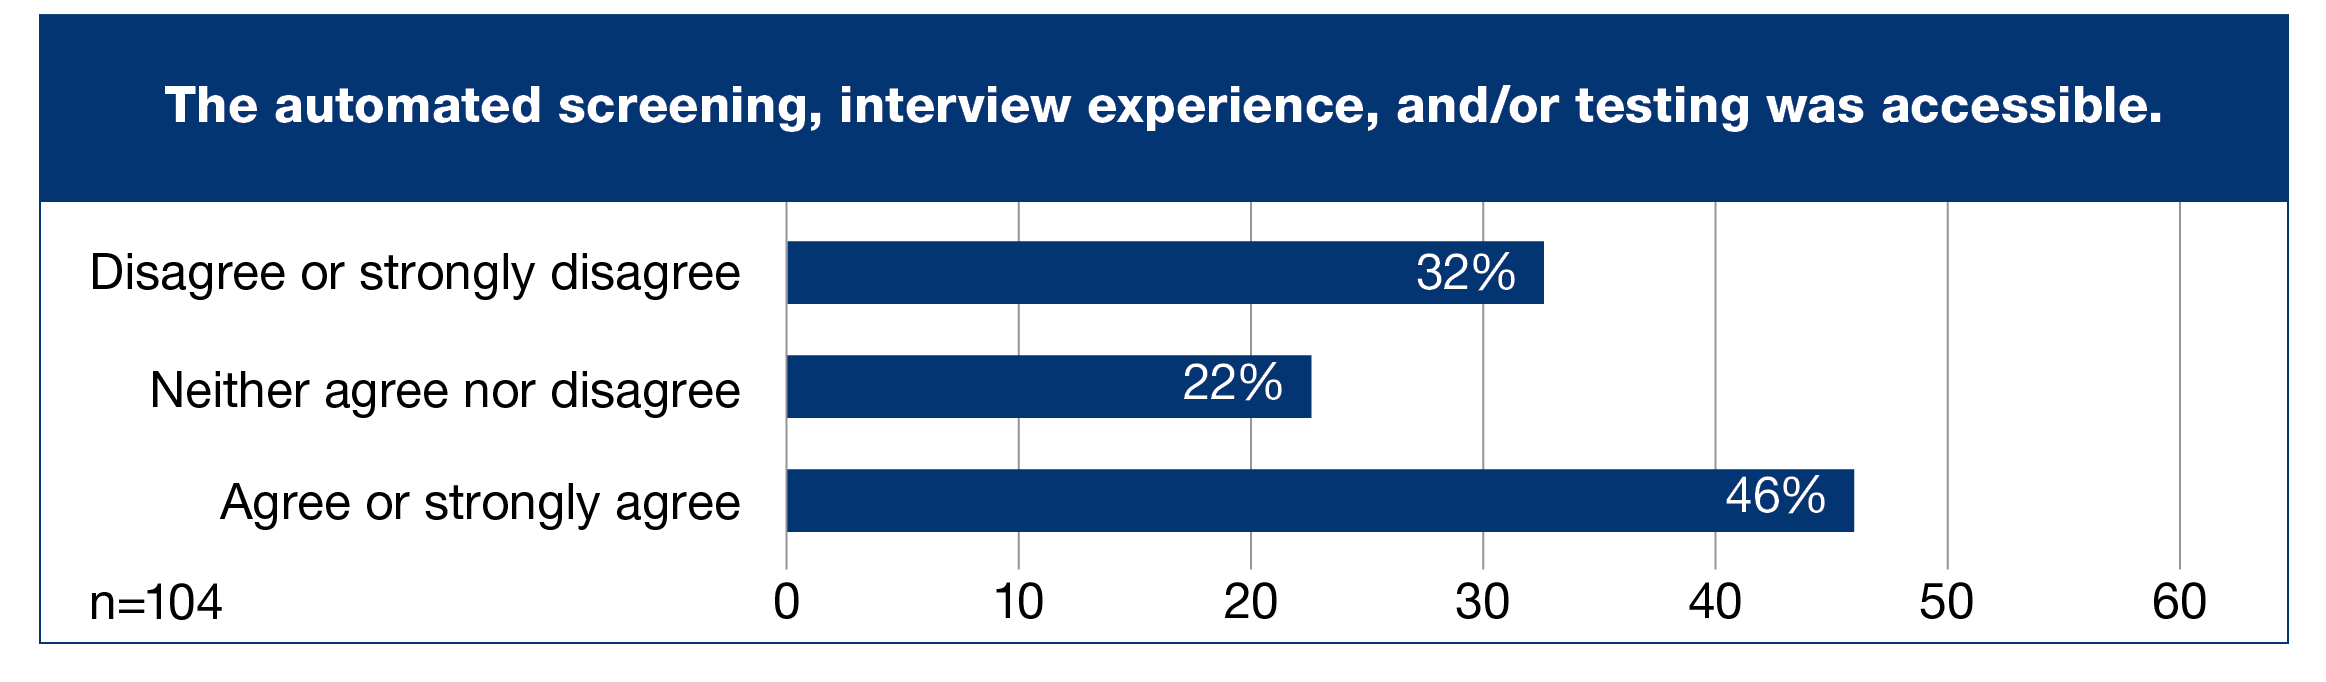 The automated screening, interview experience, and/or testing was accessible (Percent of n=104), horizontal bar graph with three bars, Disagree or strongly disagree, 32%; Neither agree nor disagree, 22%; Agree or strongly agree, 46%.